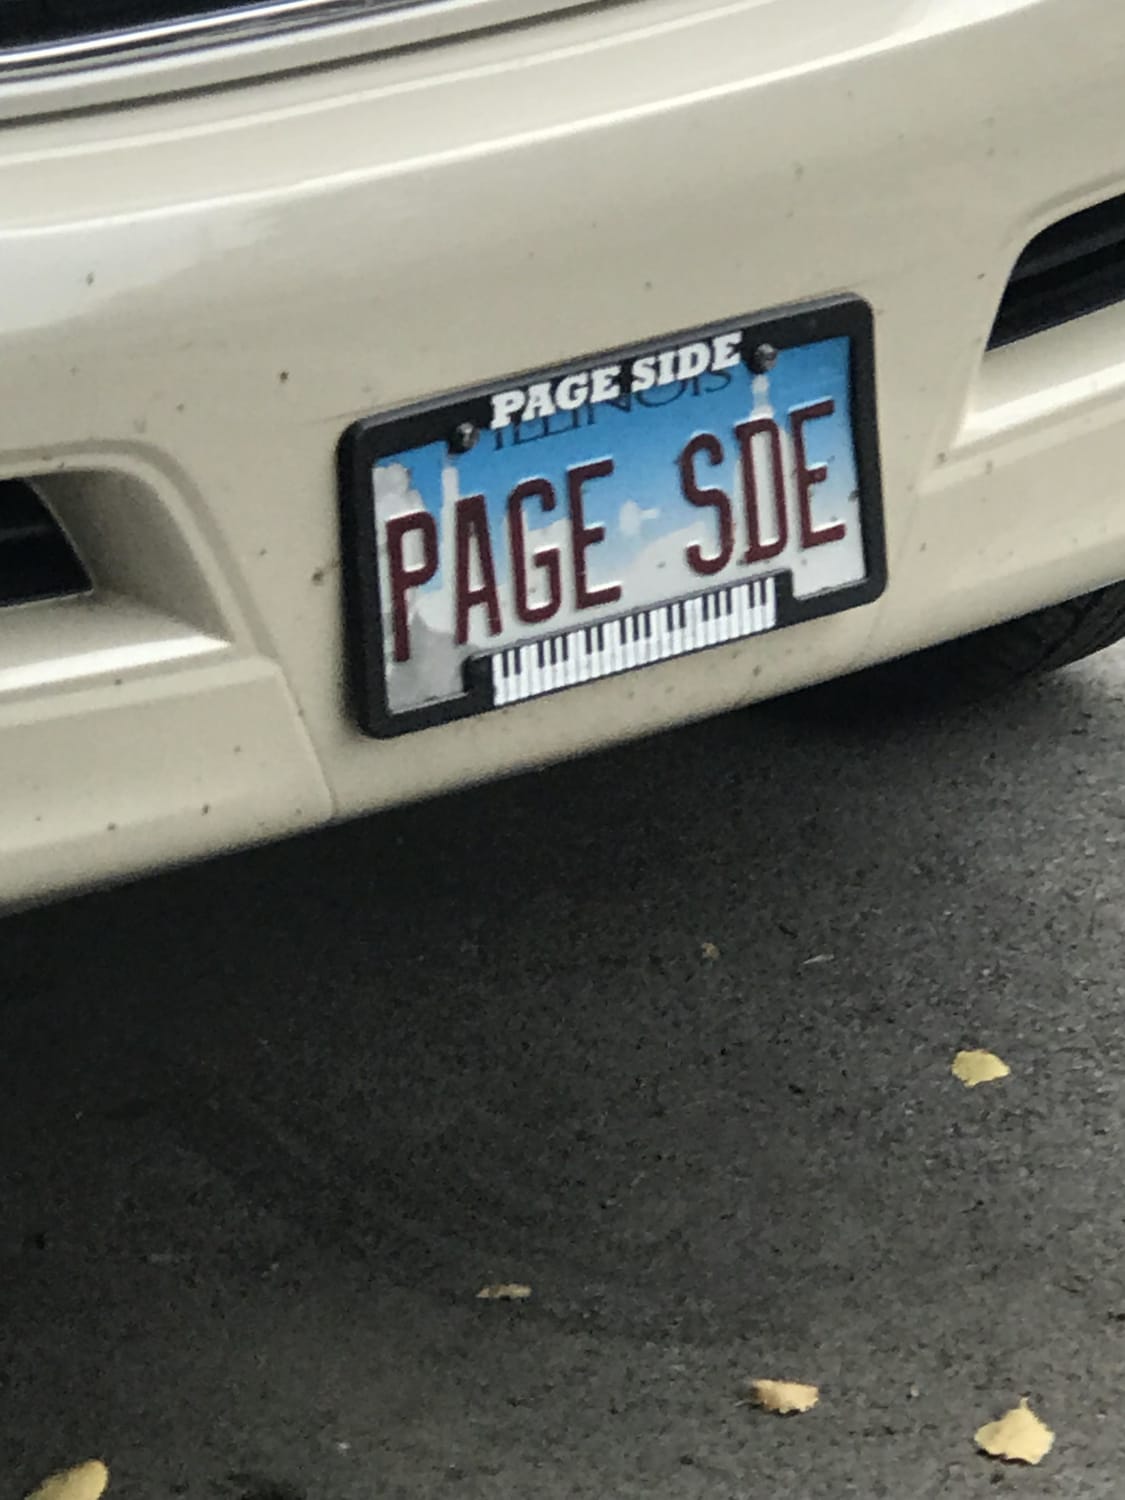 Spotted this walking through Chicago today…